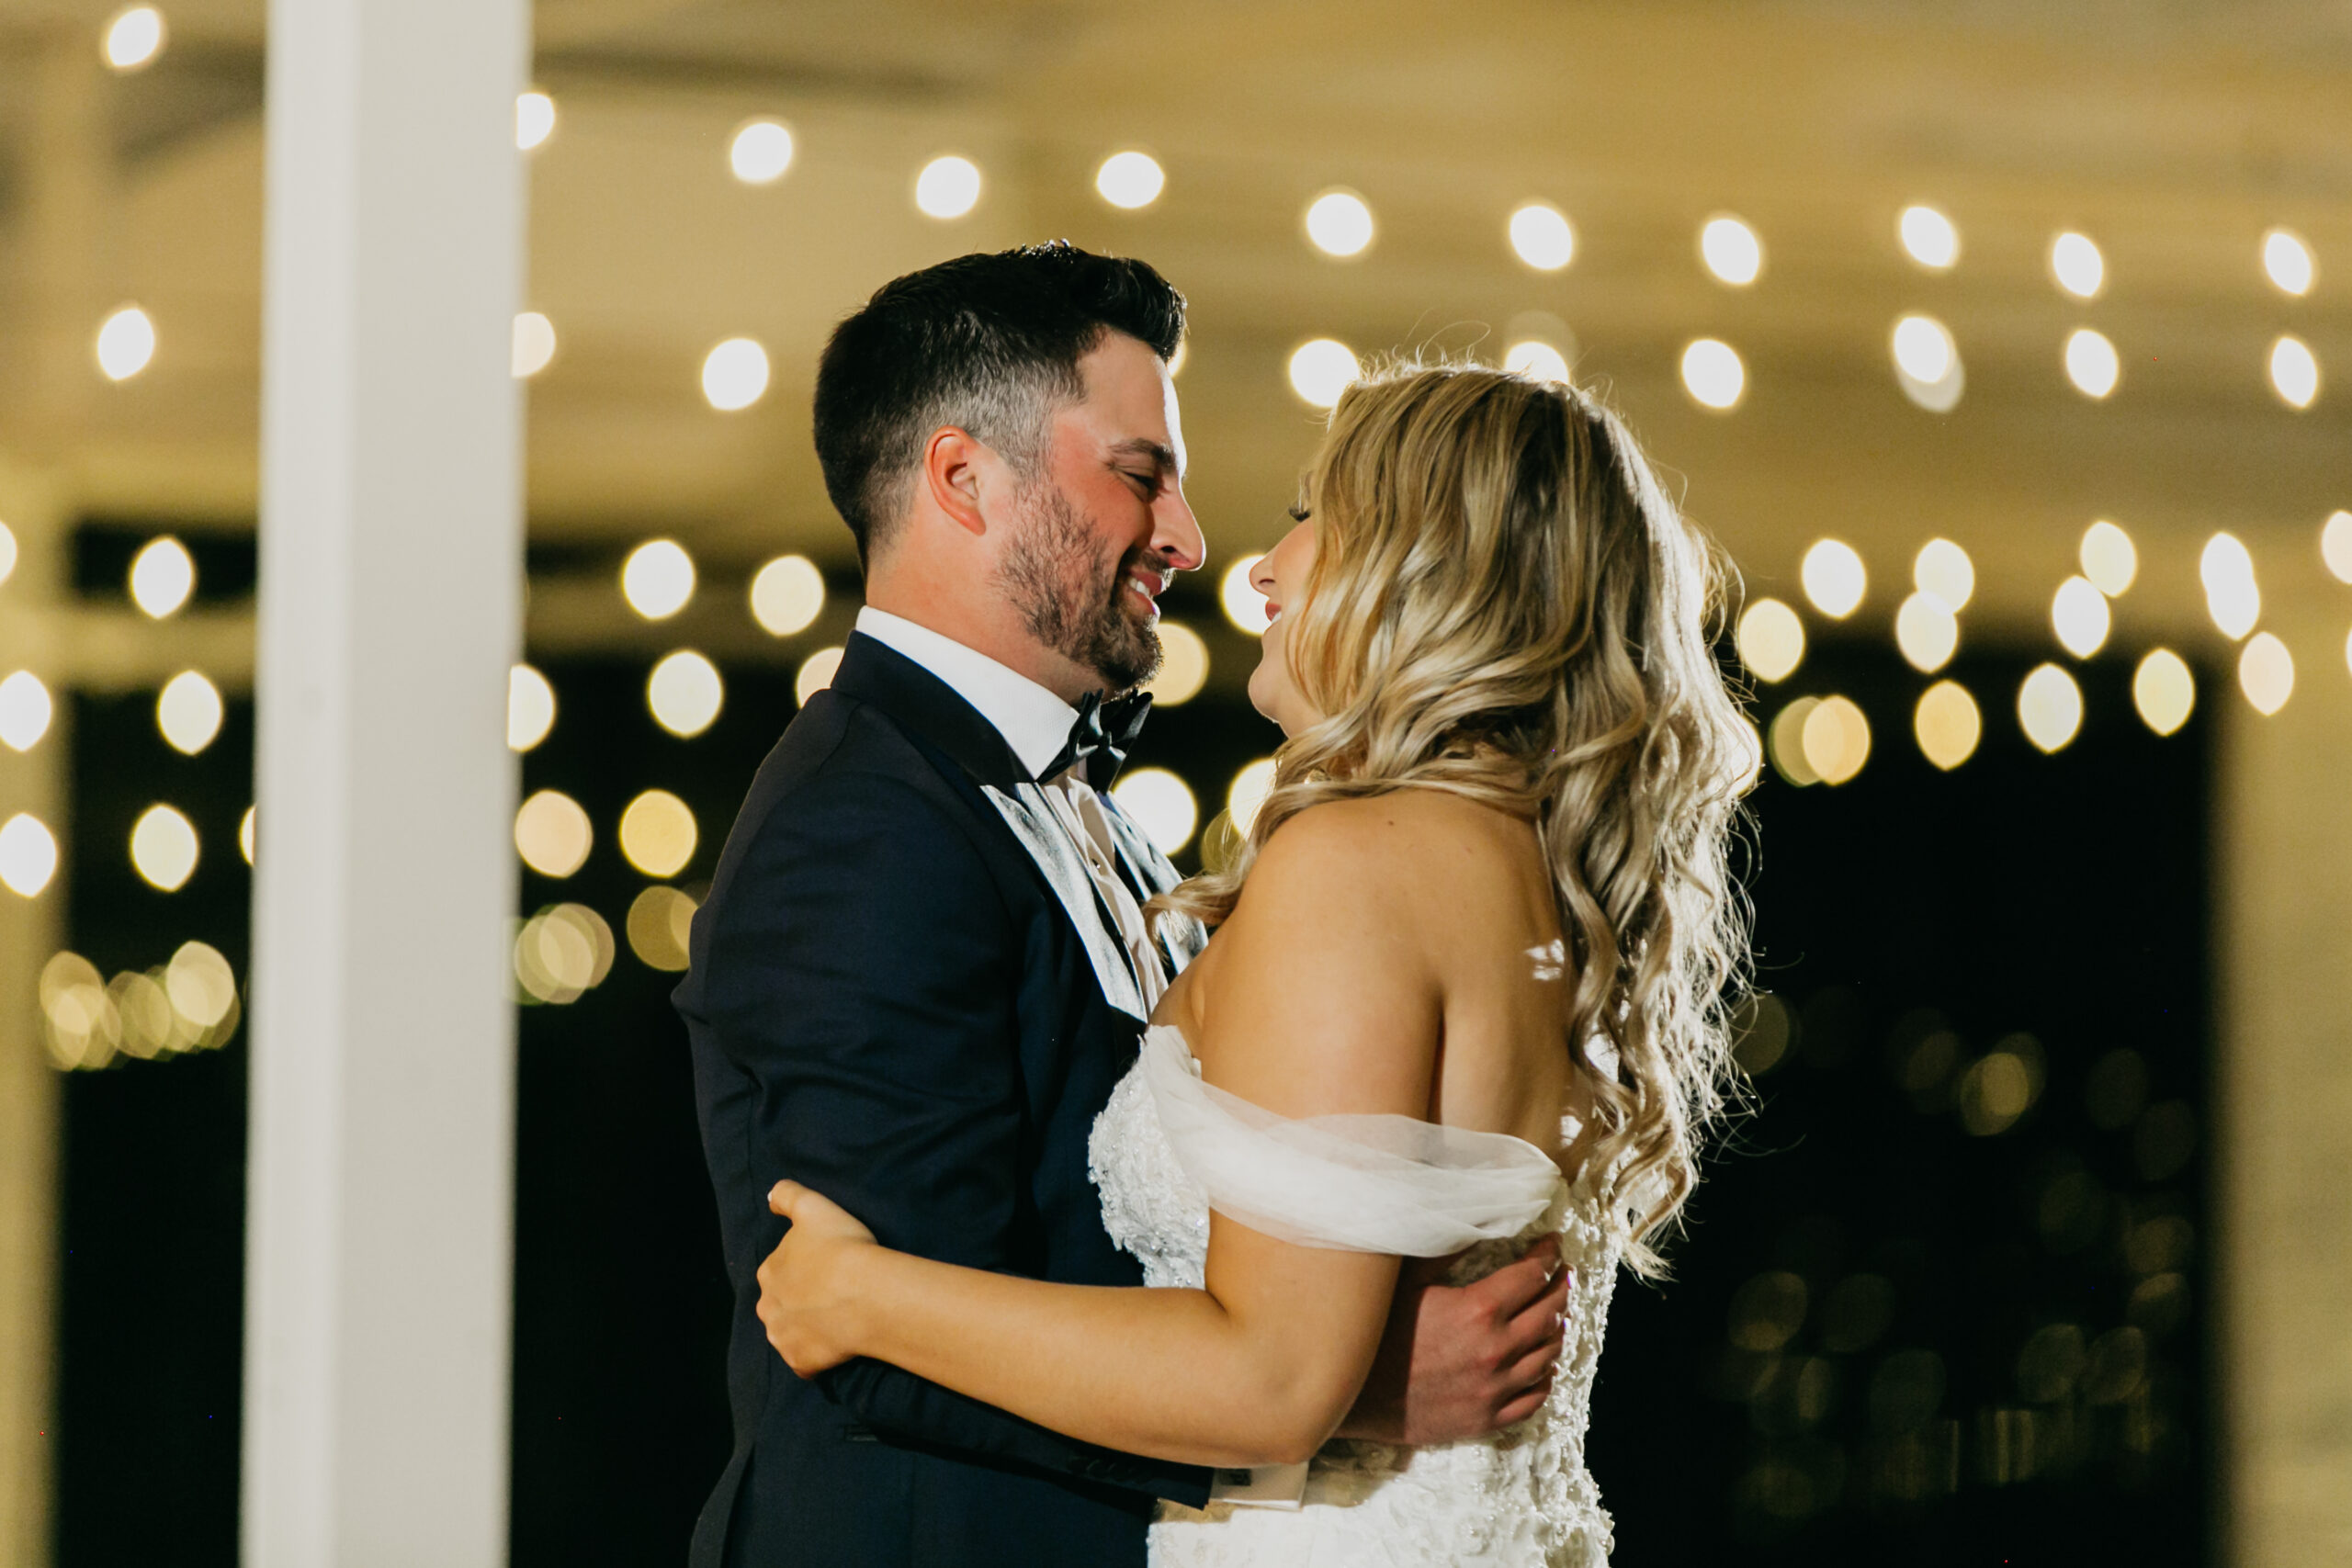 Bride and groom on their dance as a newlywed couple